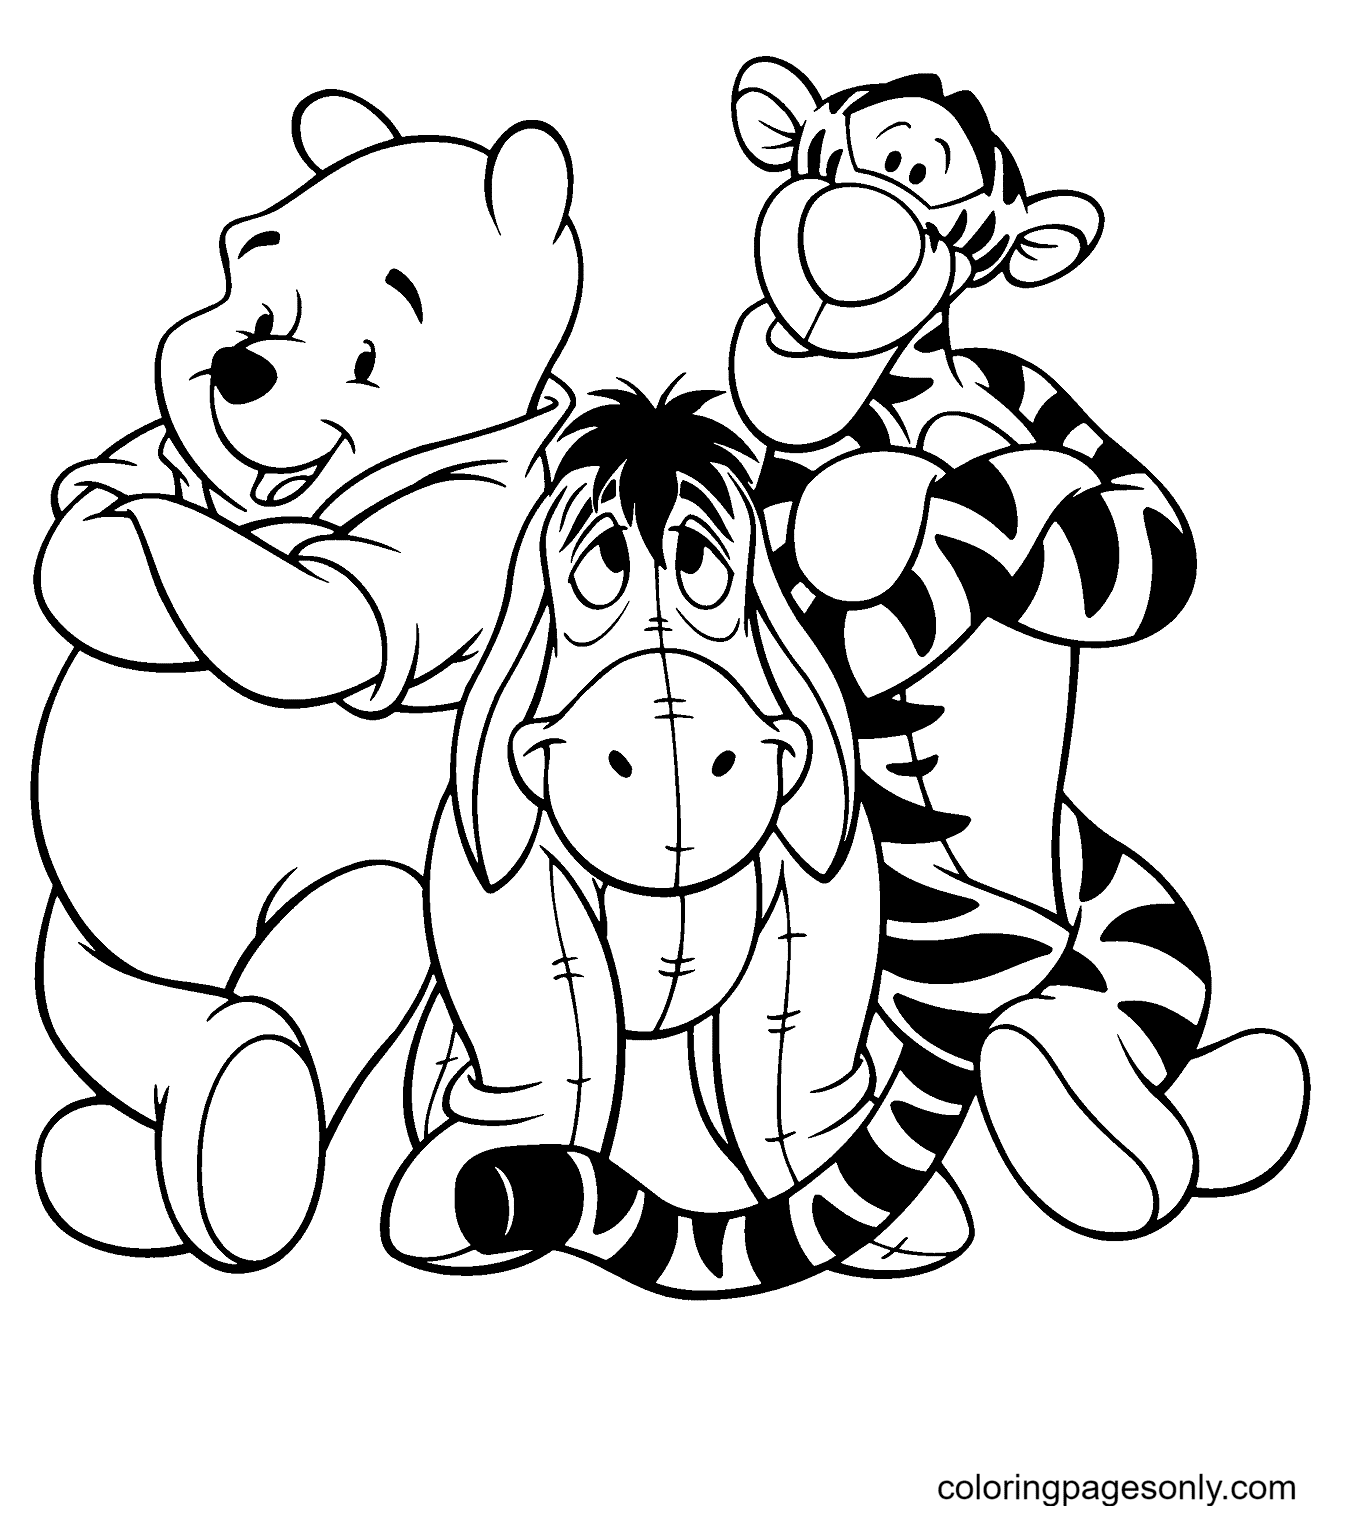 550 Coloring Pages Pooh Bear And Friends Best Free Coloring Pages